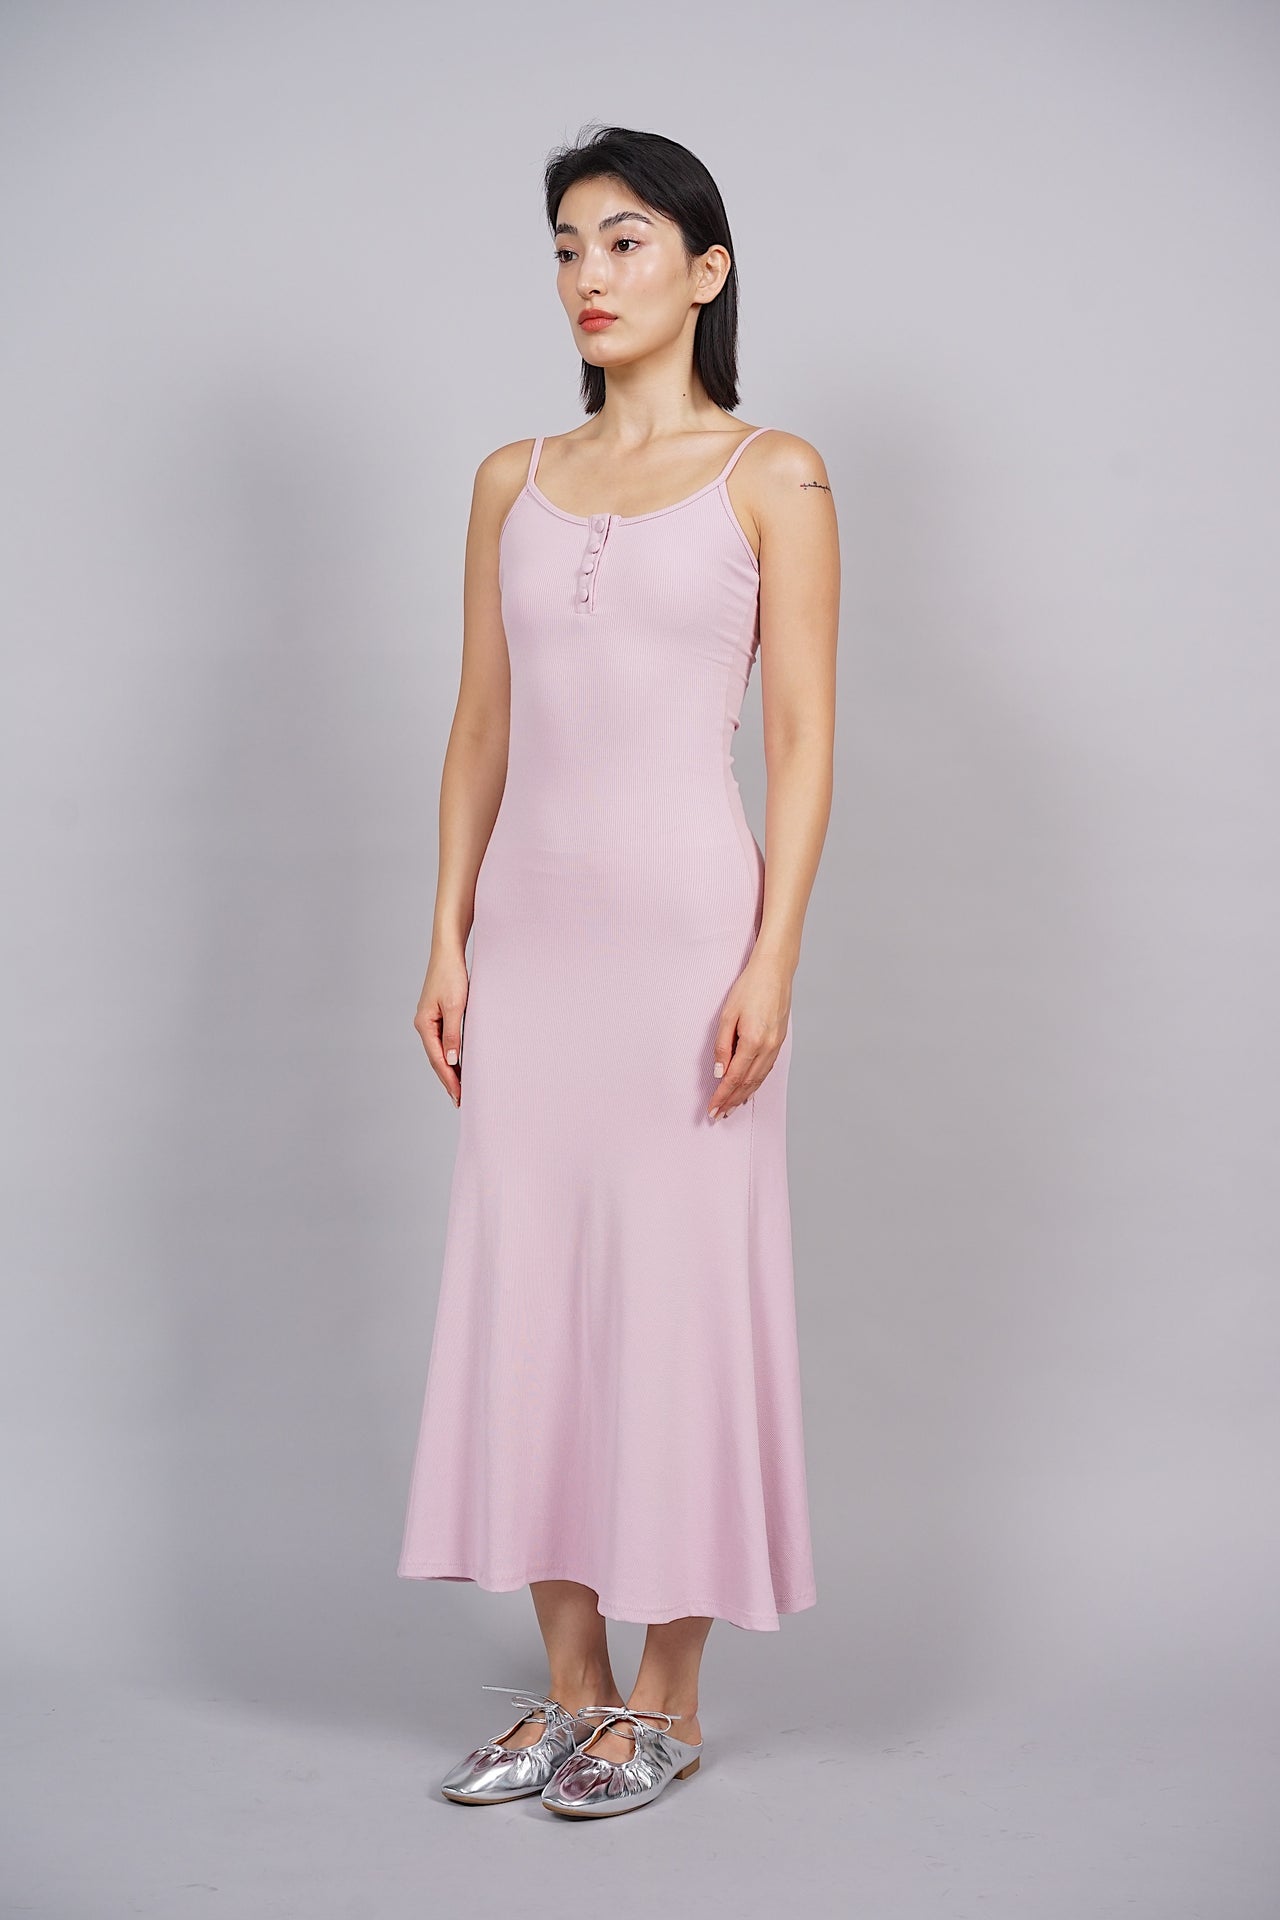 EVERYDAY / Alfonso Cami Dress in Purple Pink